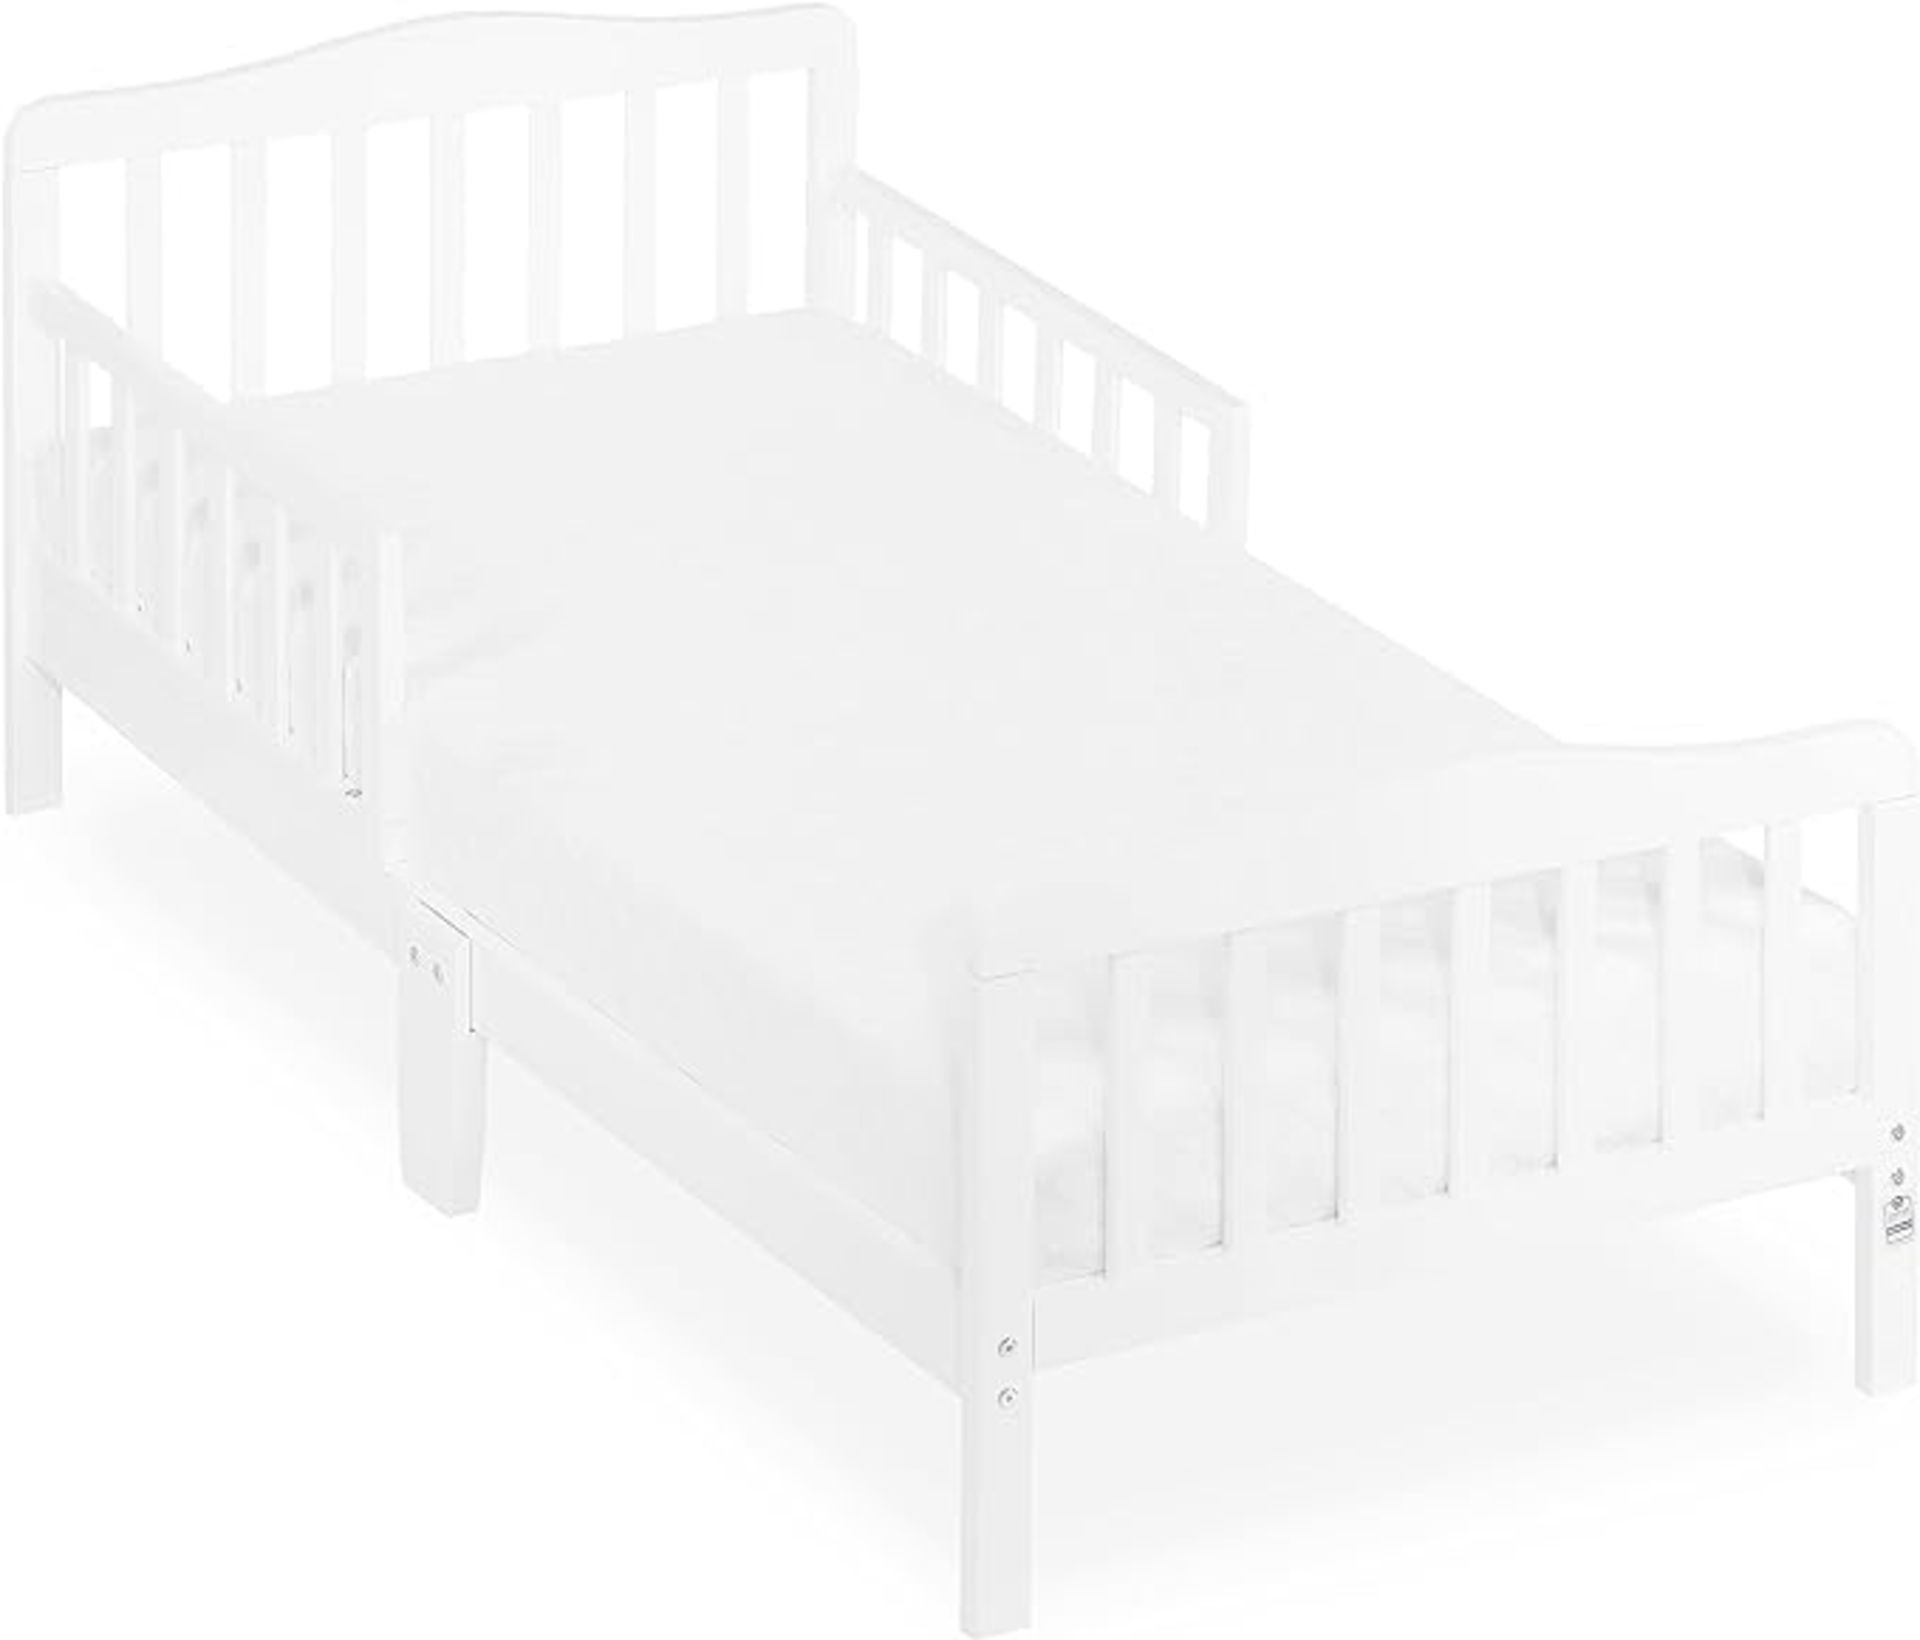 20 X Brand New Dream on Me Classic Toddler BedS. Product dimensionS - 144.8L x 71.1W x 76.2H CM - Image 3 of 4